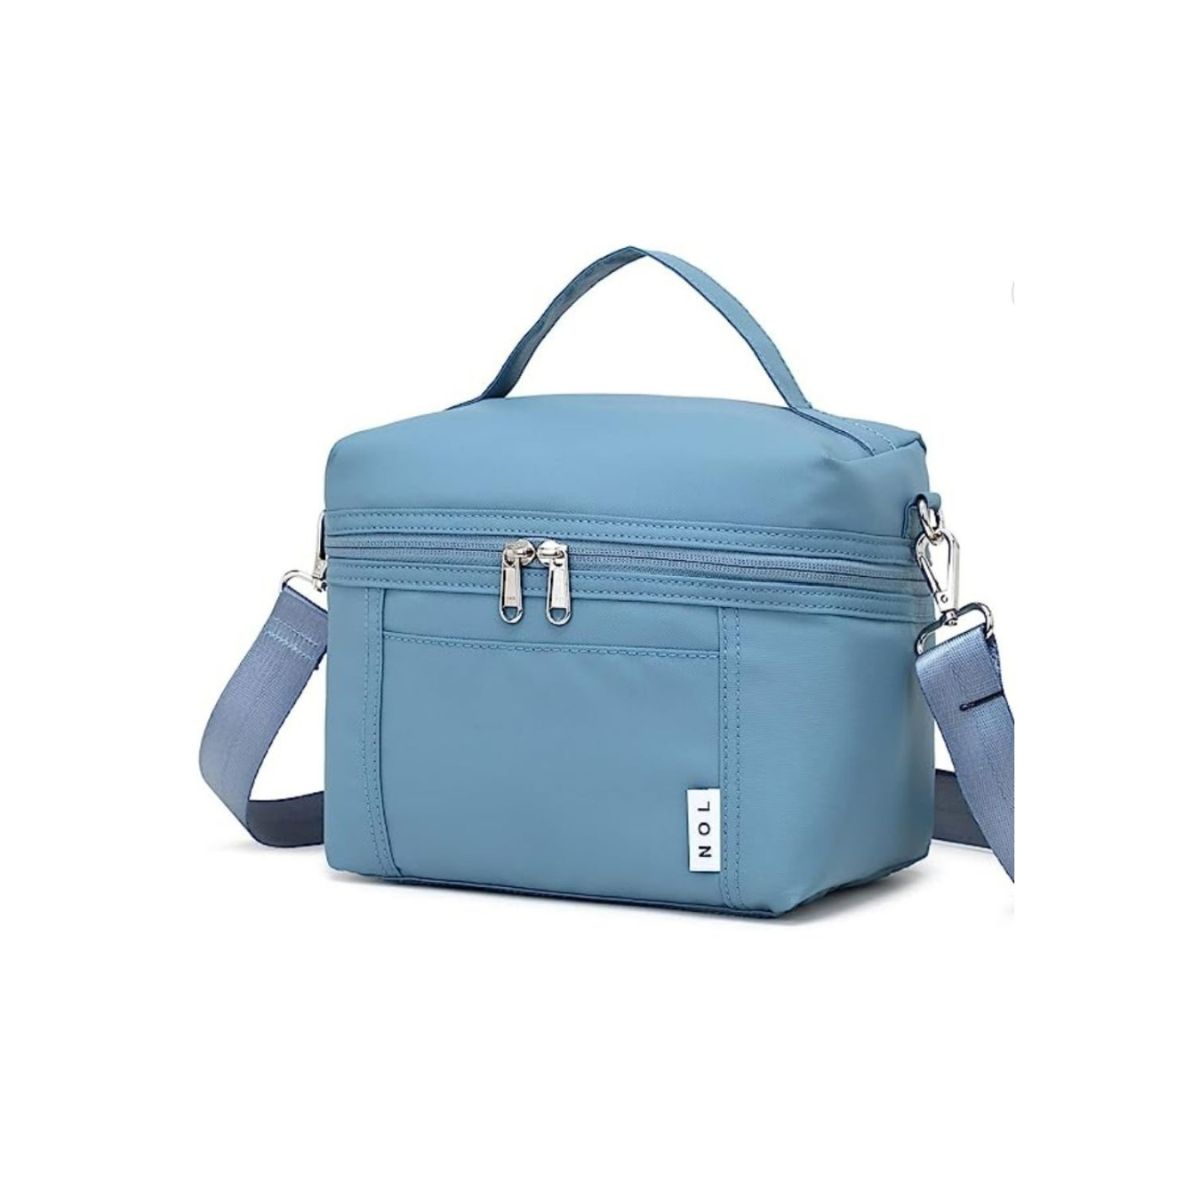 Blue lunch box with shoulder strap